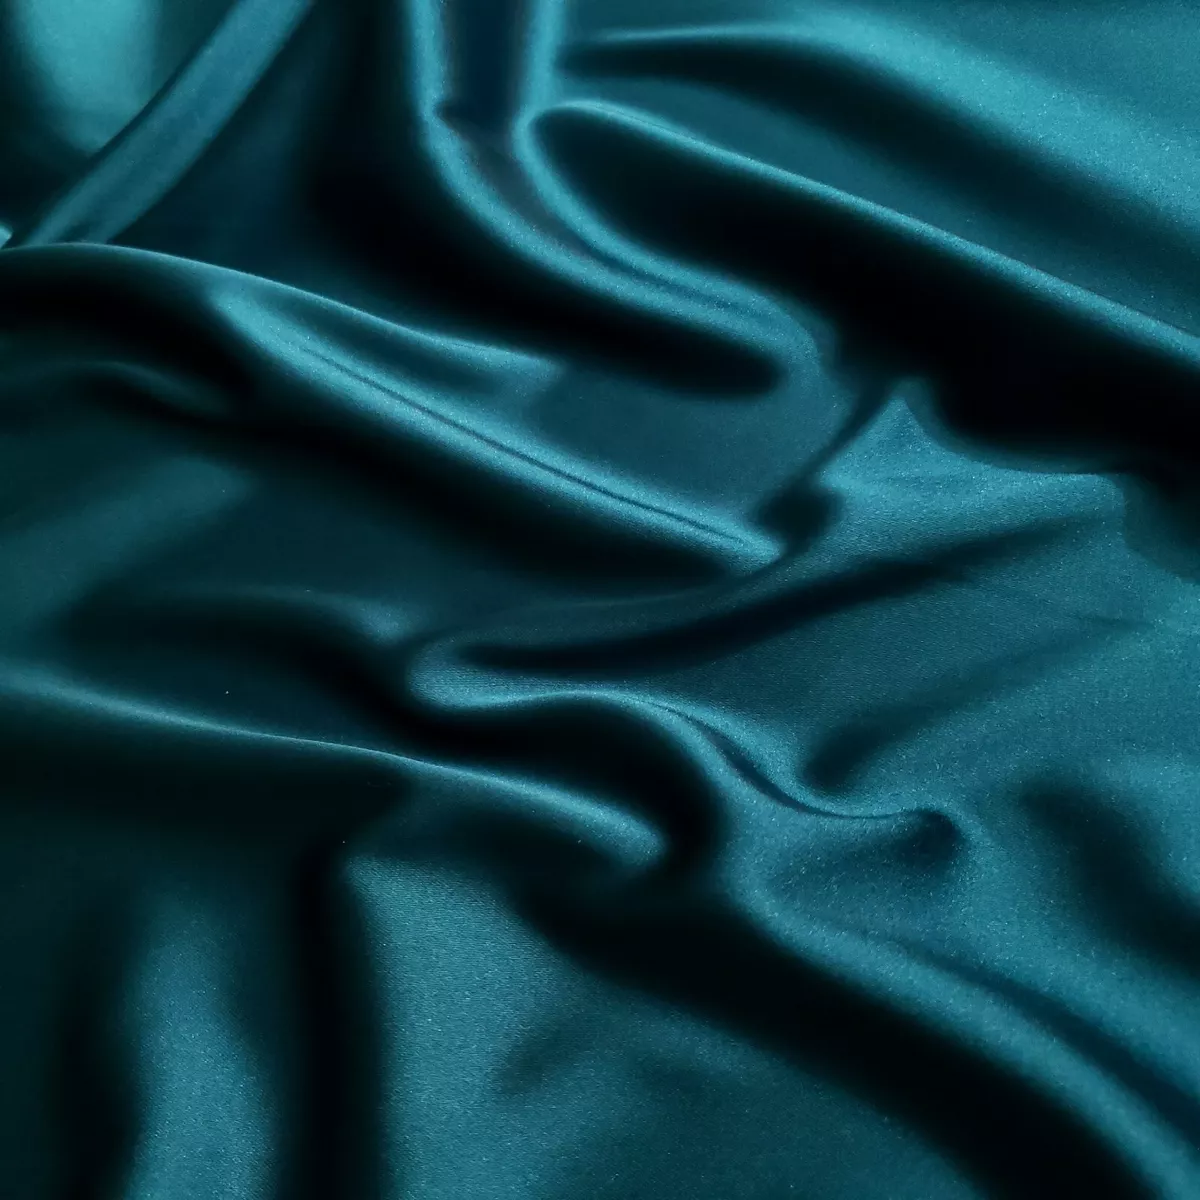 High End Green Teal Stretch Soft Sheen Charmeuse Satin Fabric 58